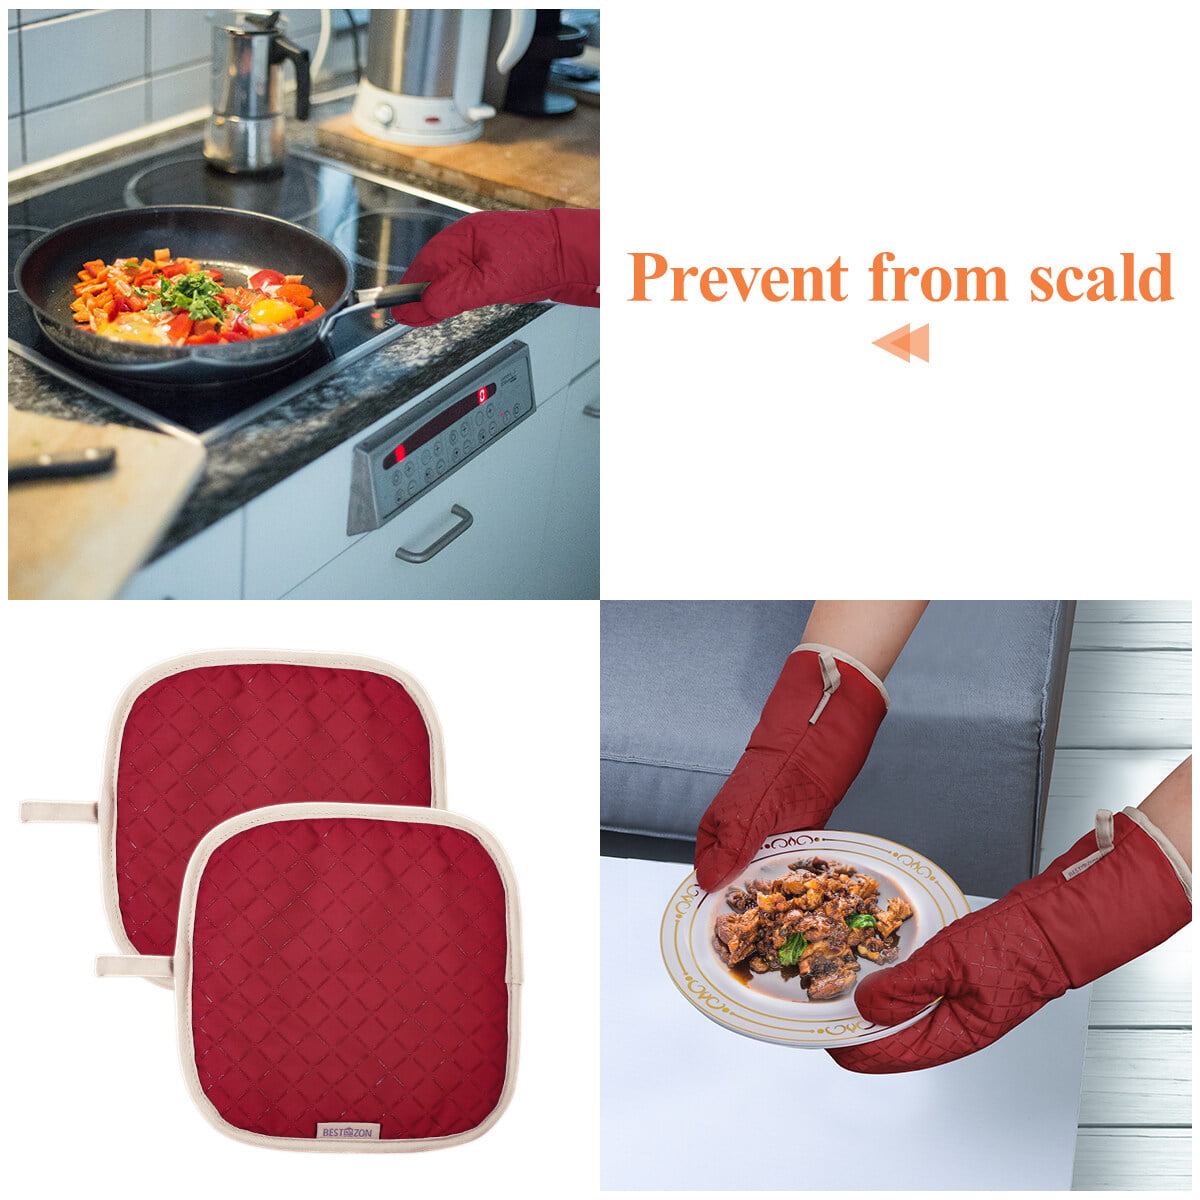 Hot Pads Silicone Oven Mitts And Pot Holders Sets With Quilted Liner Heat  Resistant Kitchen Mitt Waterproof Flexible Gloves For Cooking Baking  Grilling From Crazyfairyland, $12.39